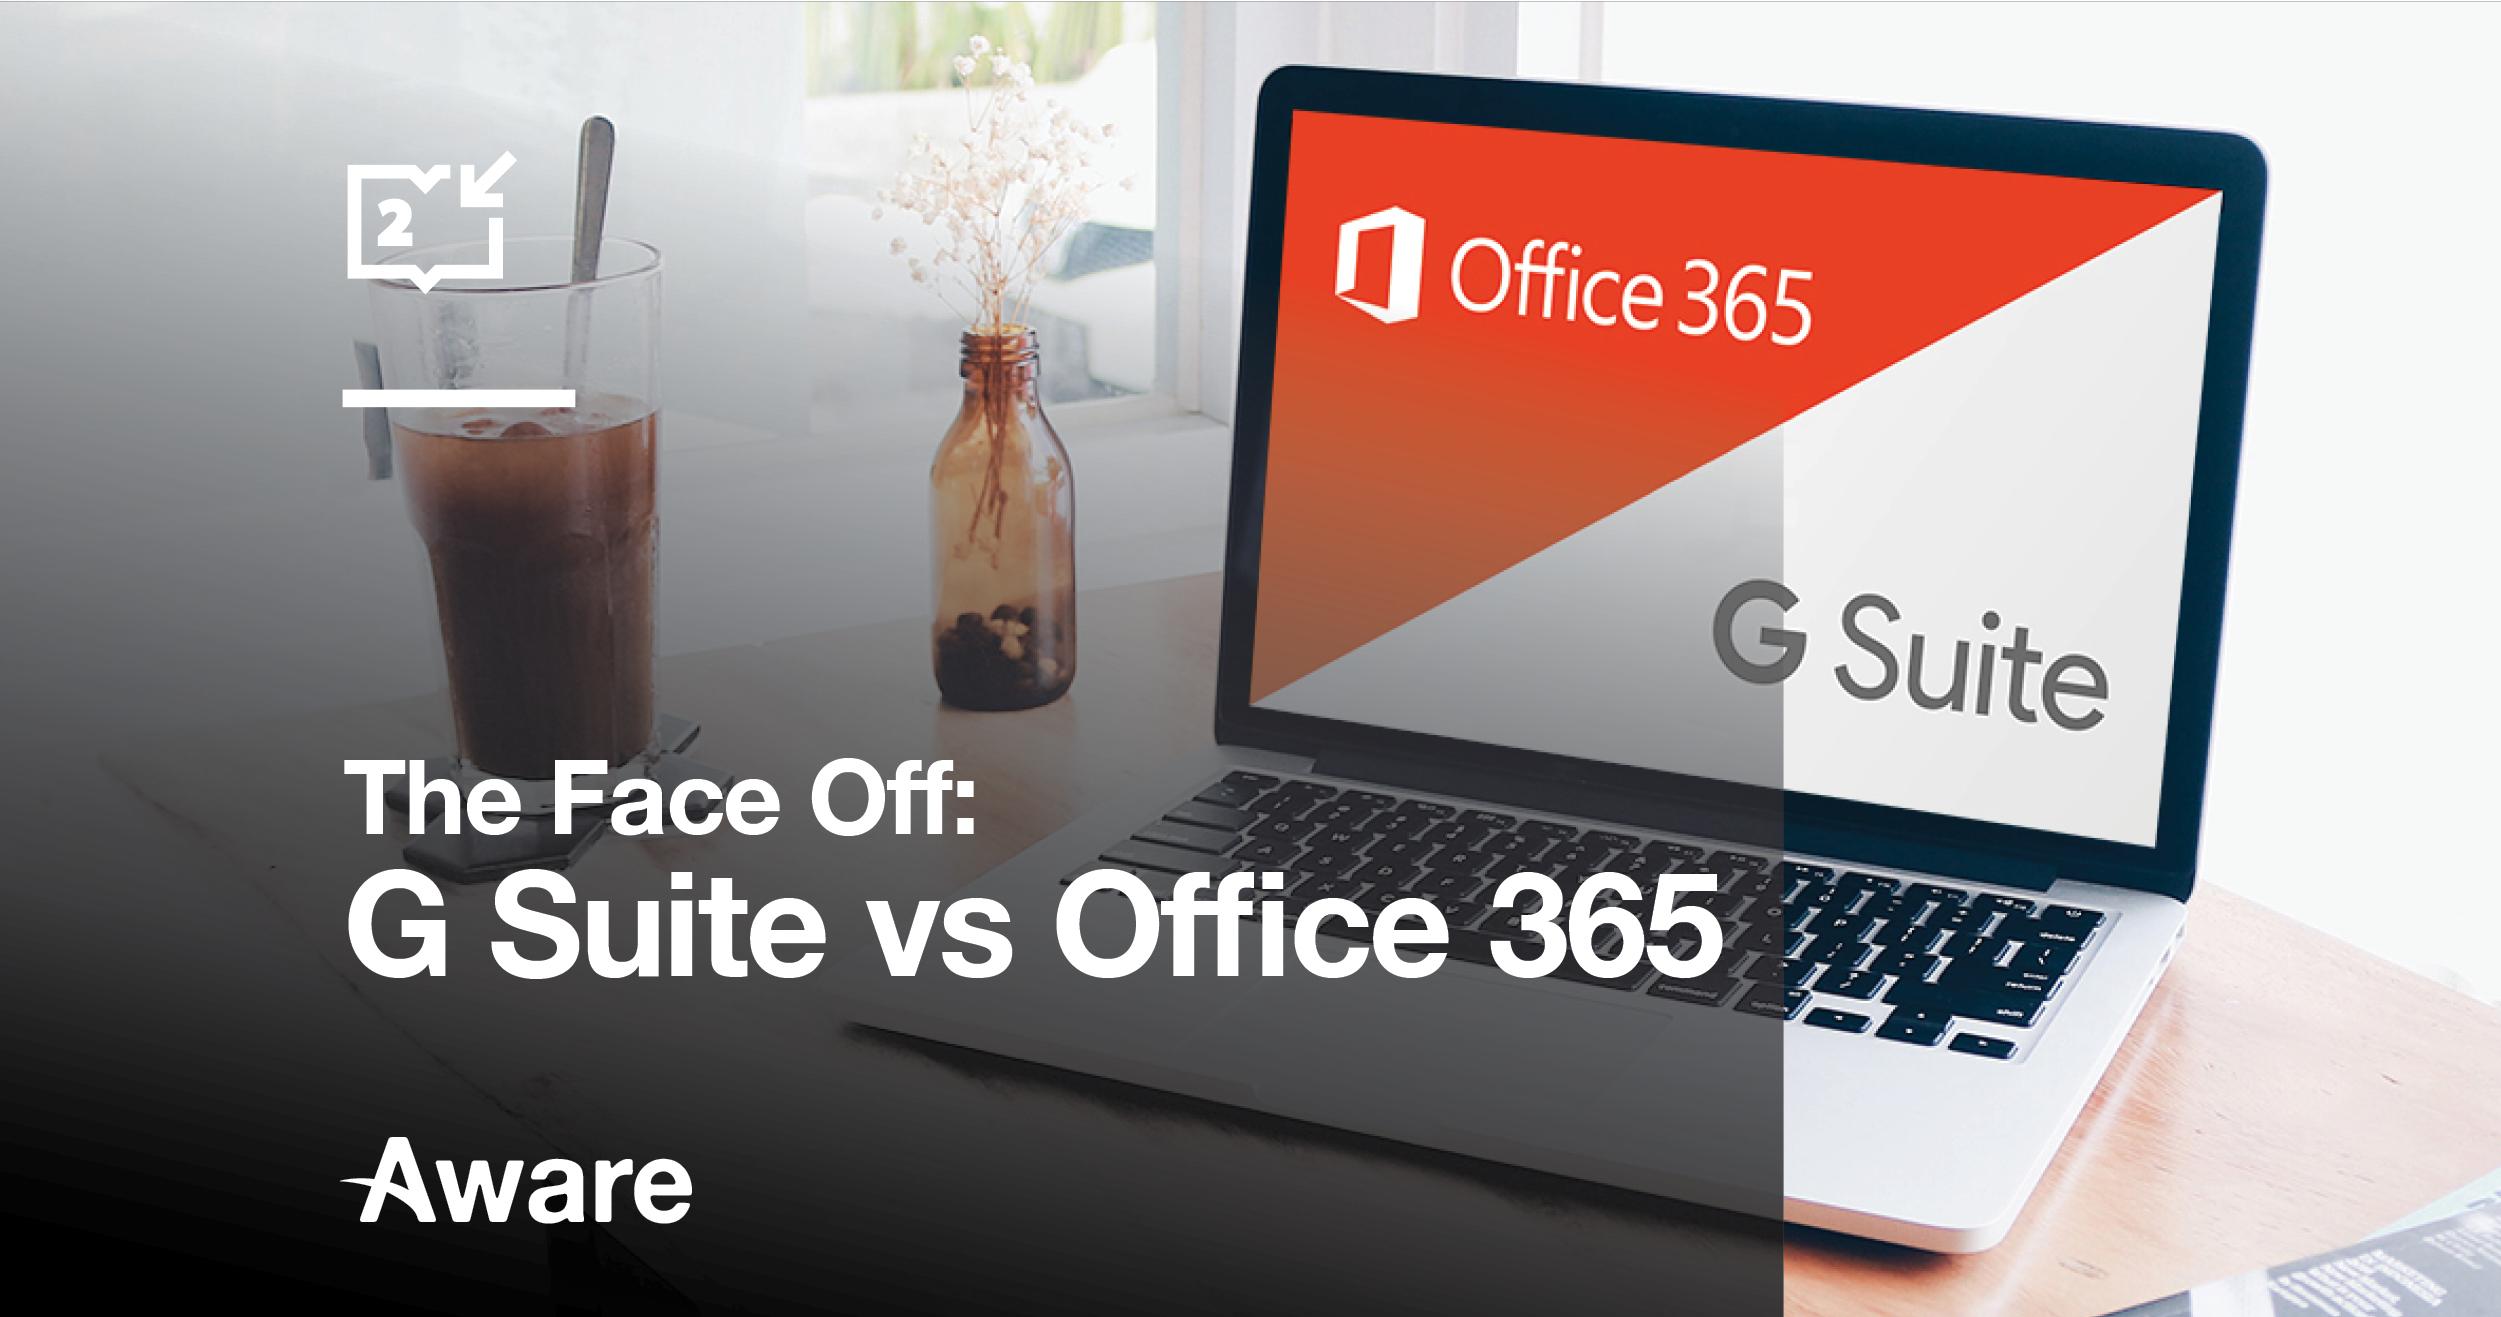 The Face Off: G Suite vs Office 365 – Who Battles to Business Victory?